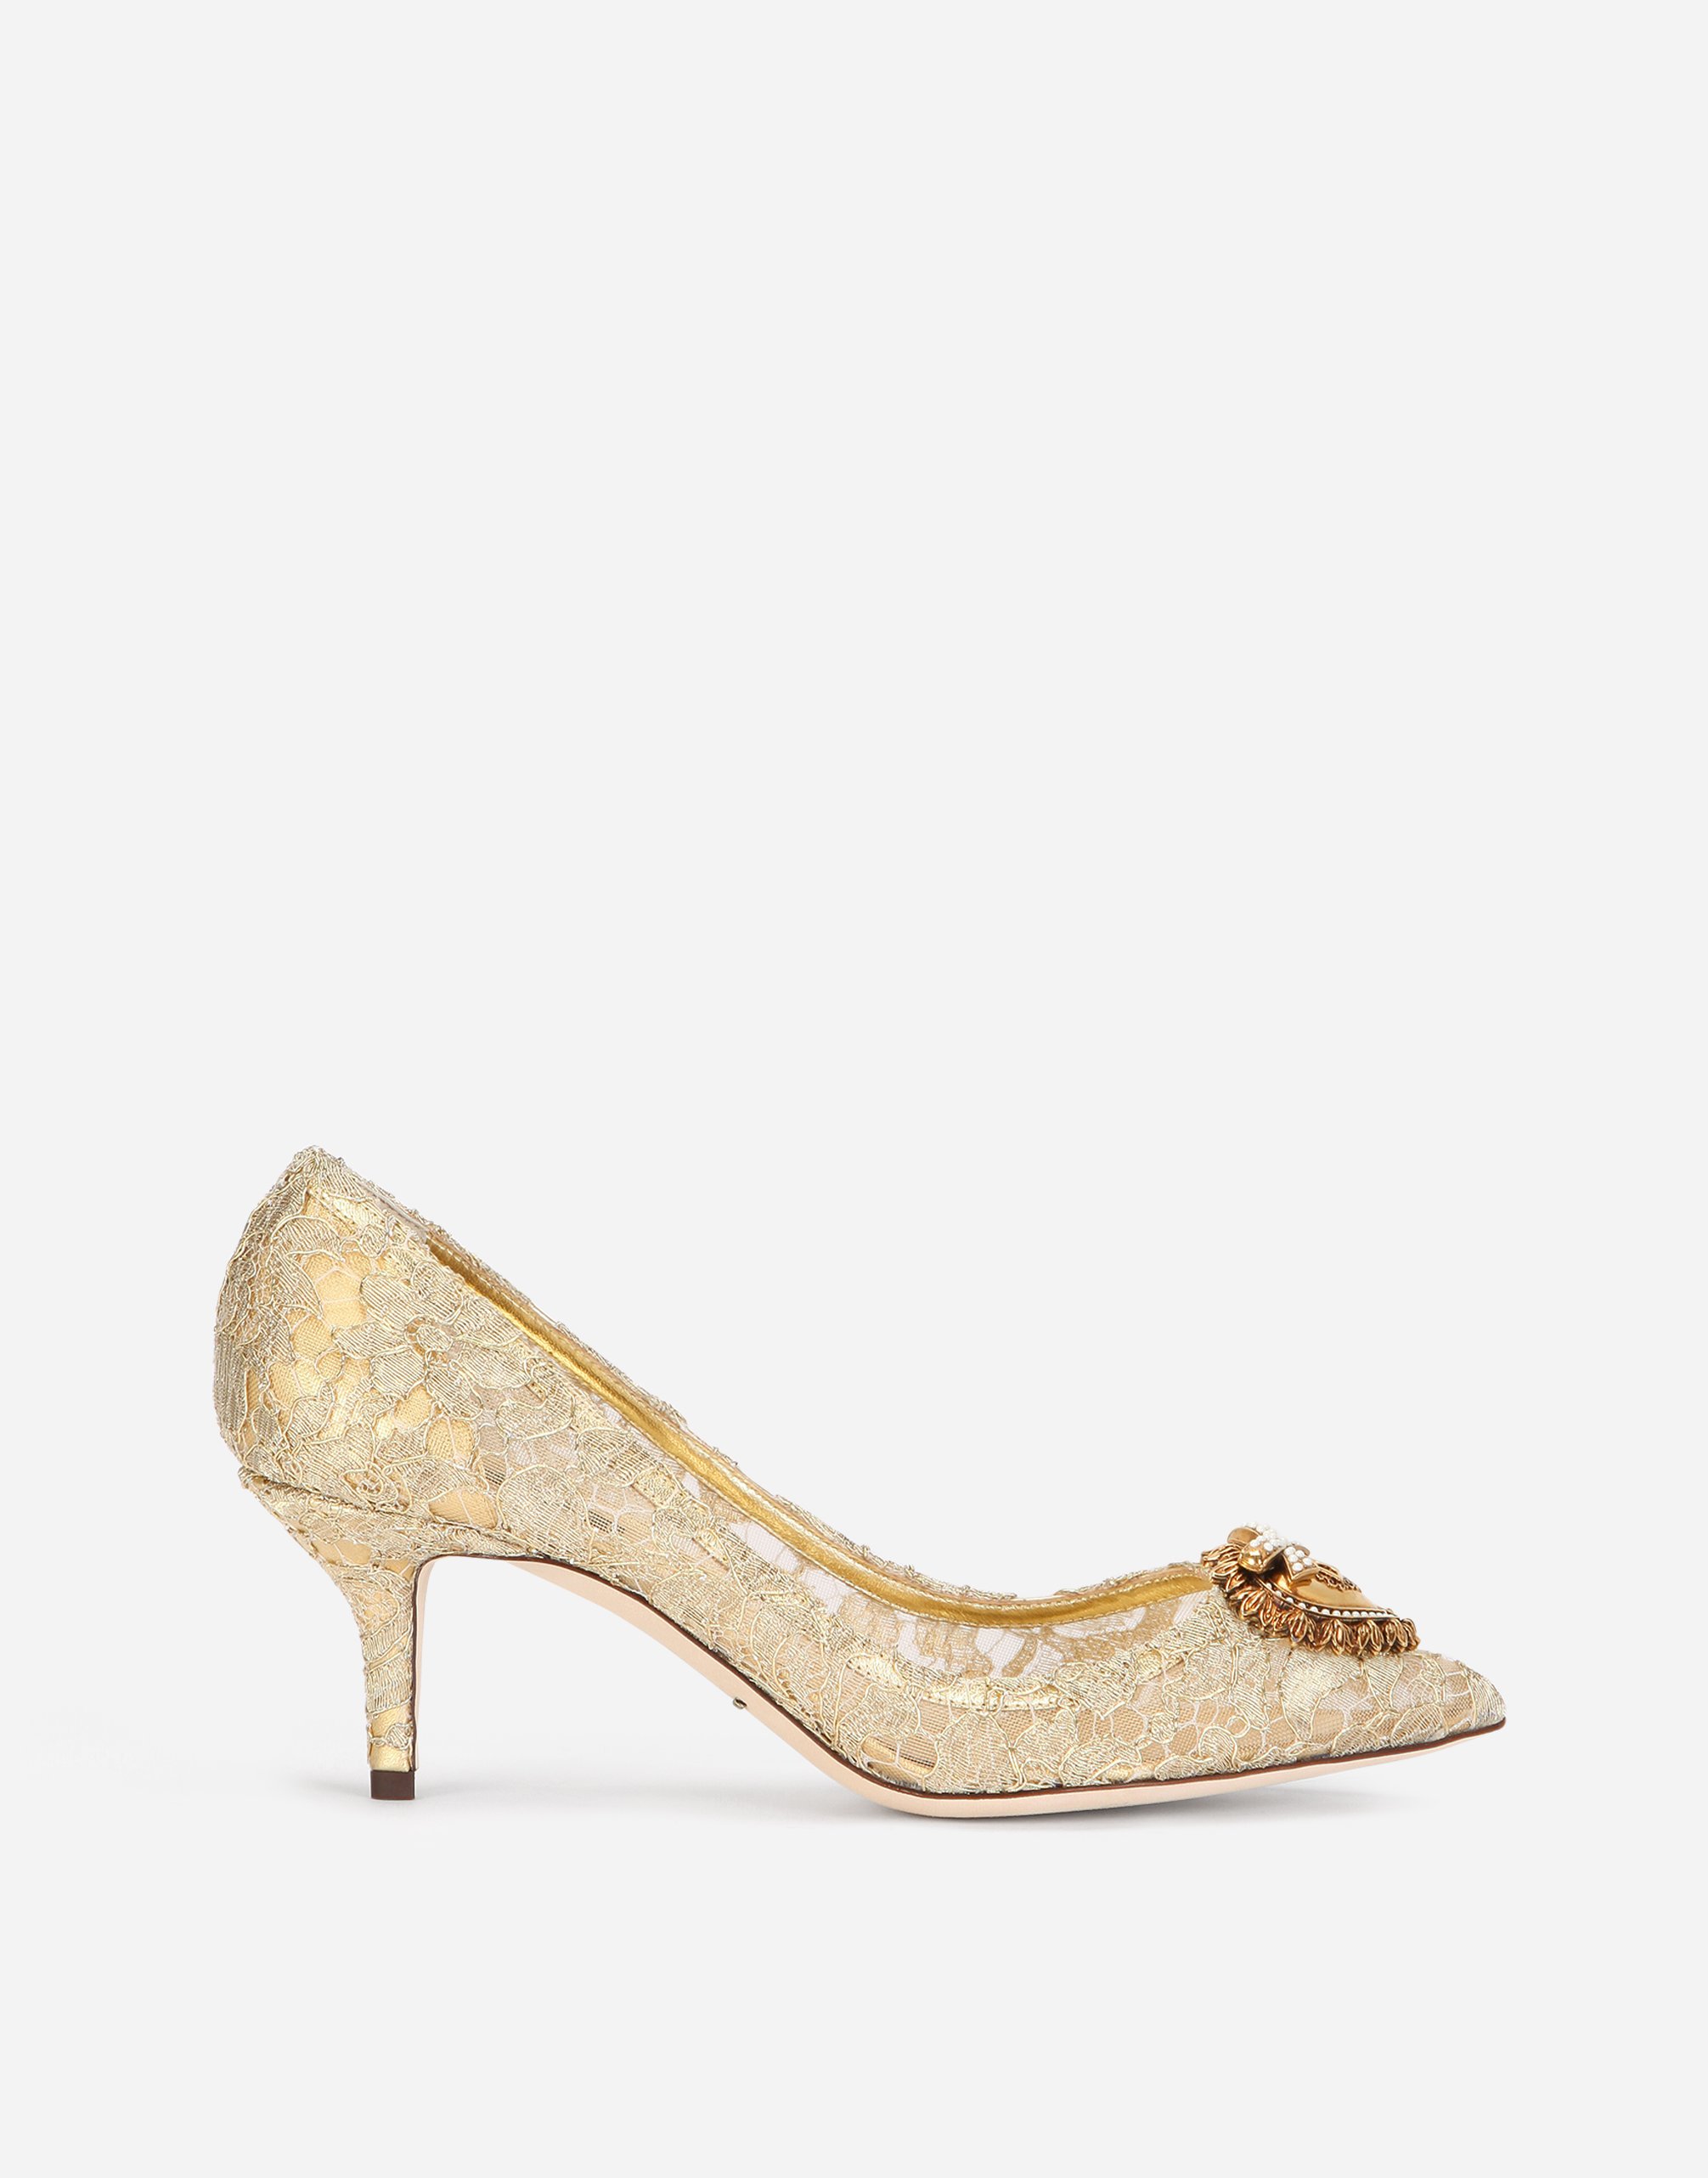 Taormina lace pumps with Devotion heart in Gold for Women | Dolce&Gabbana®